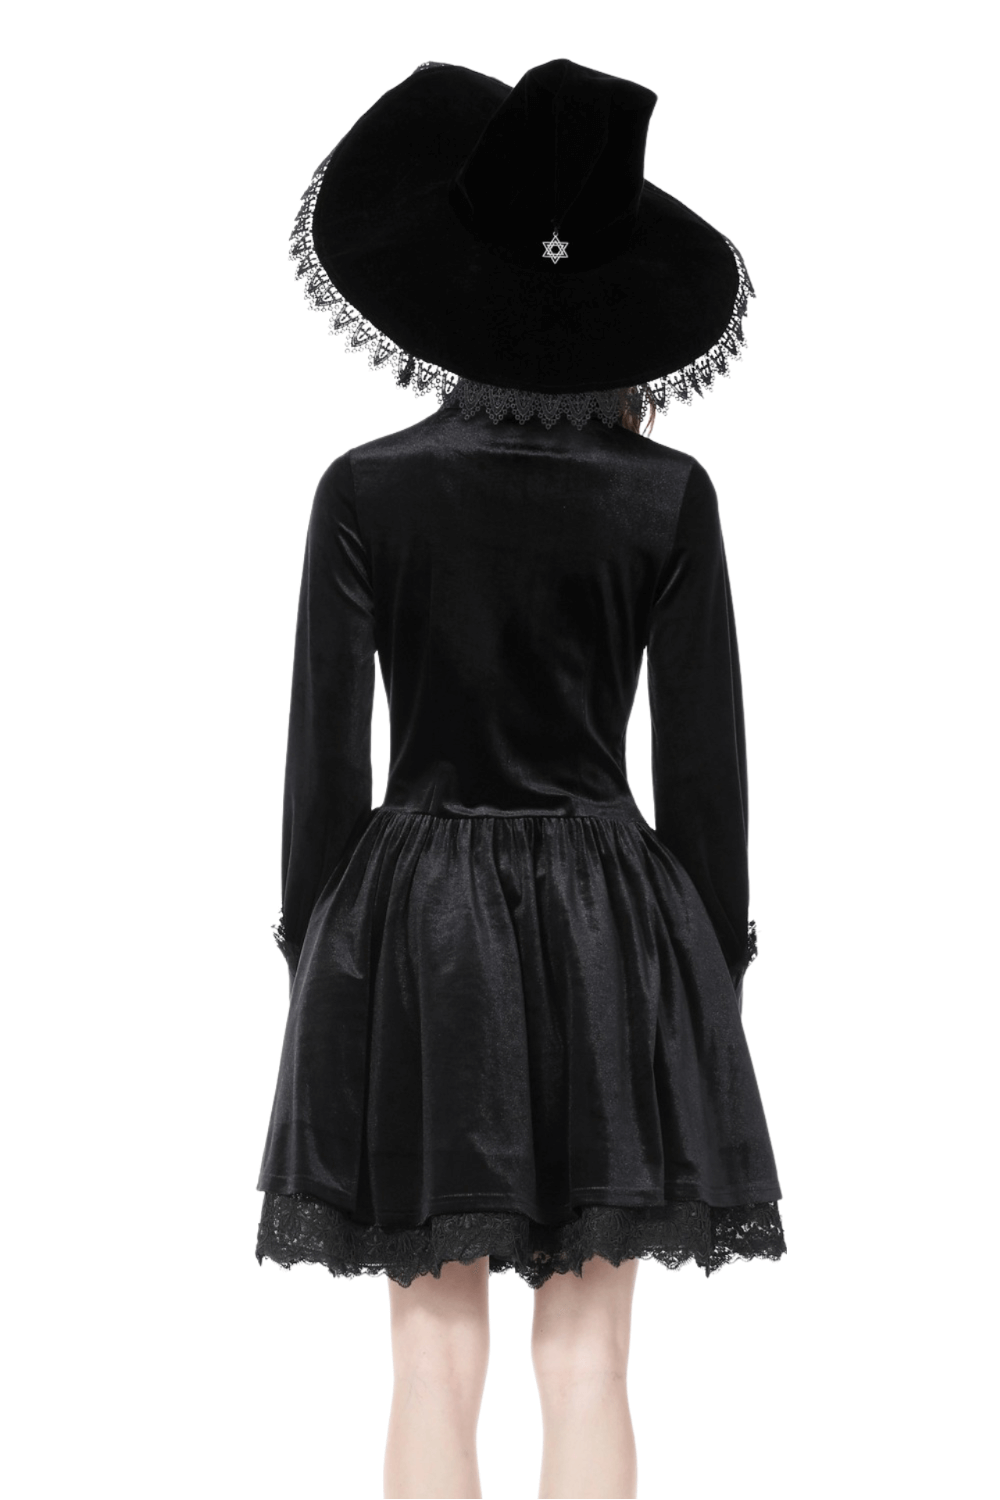 Black Velvet Batwing Collar Gothic Dress with Lace Cuffs